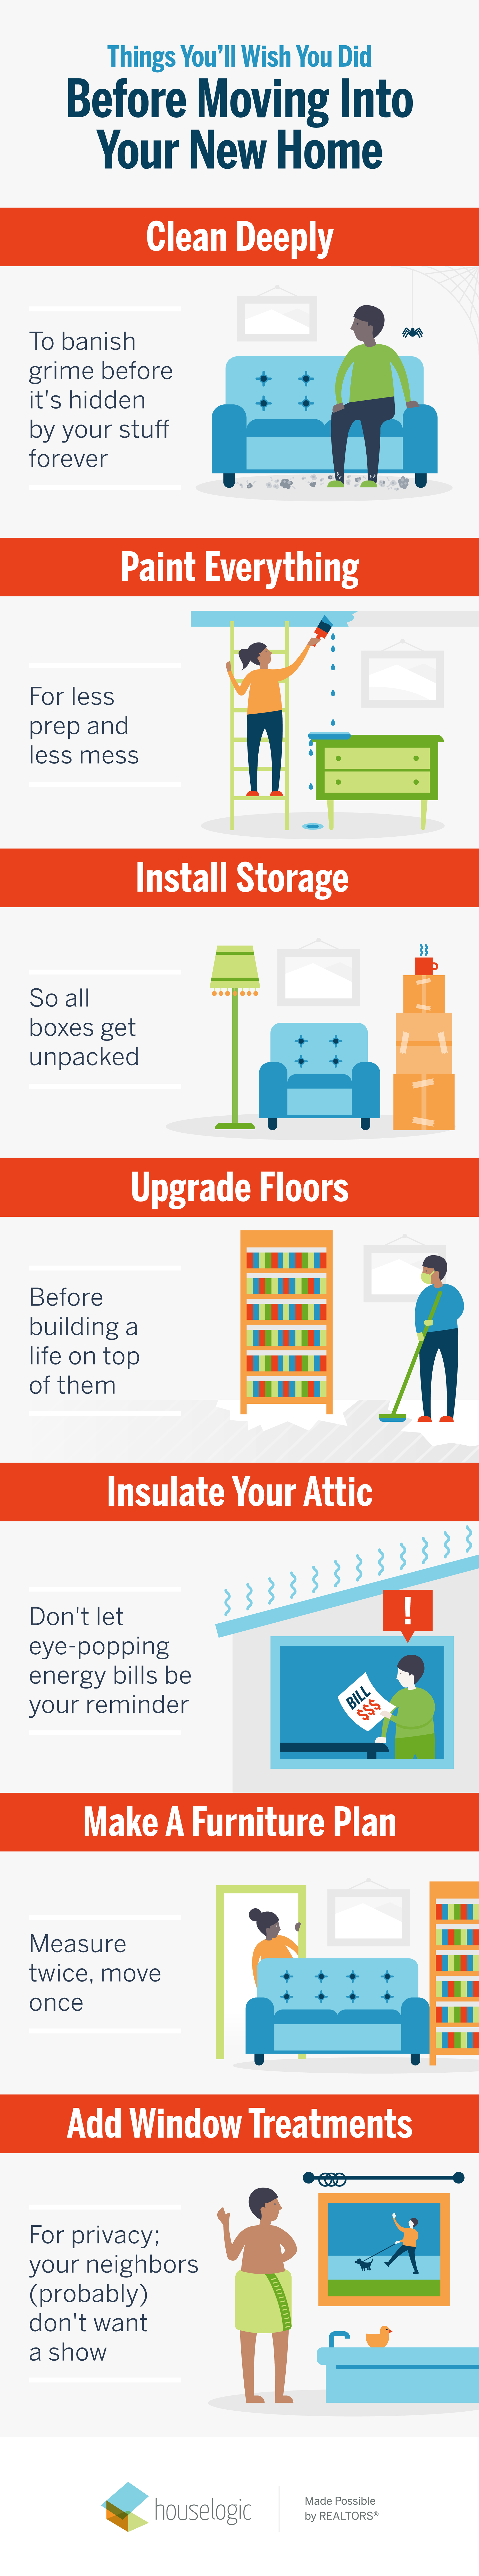 Before You Move In infographic